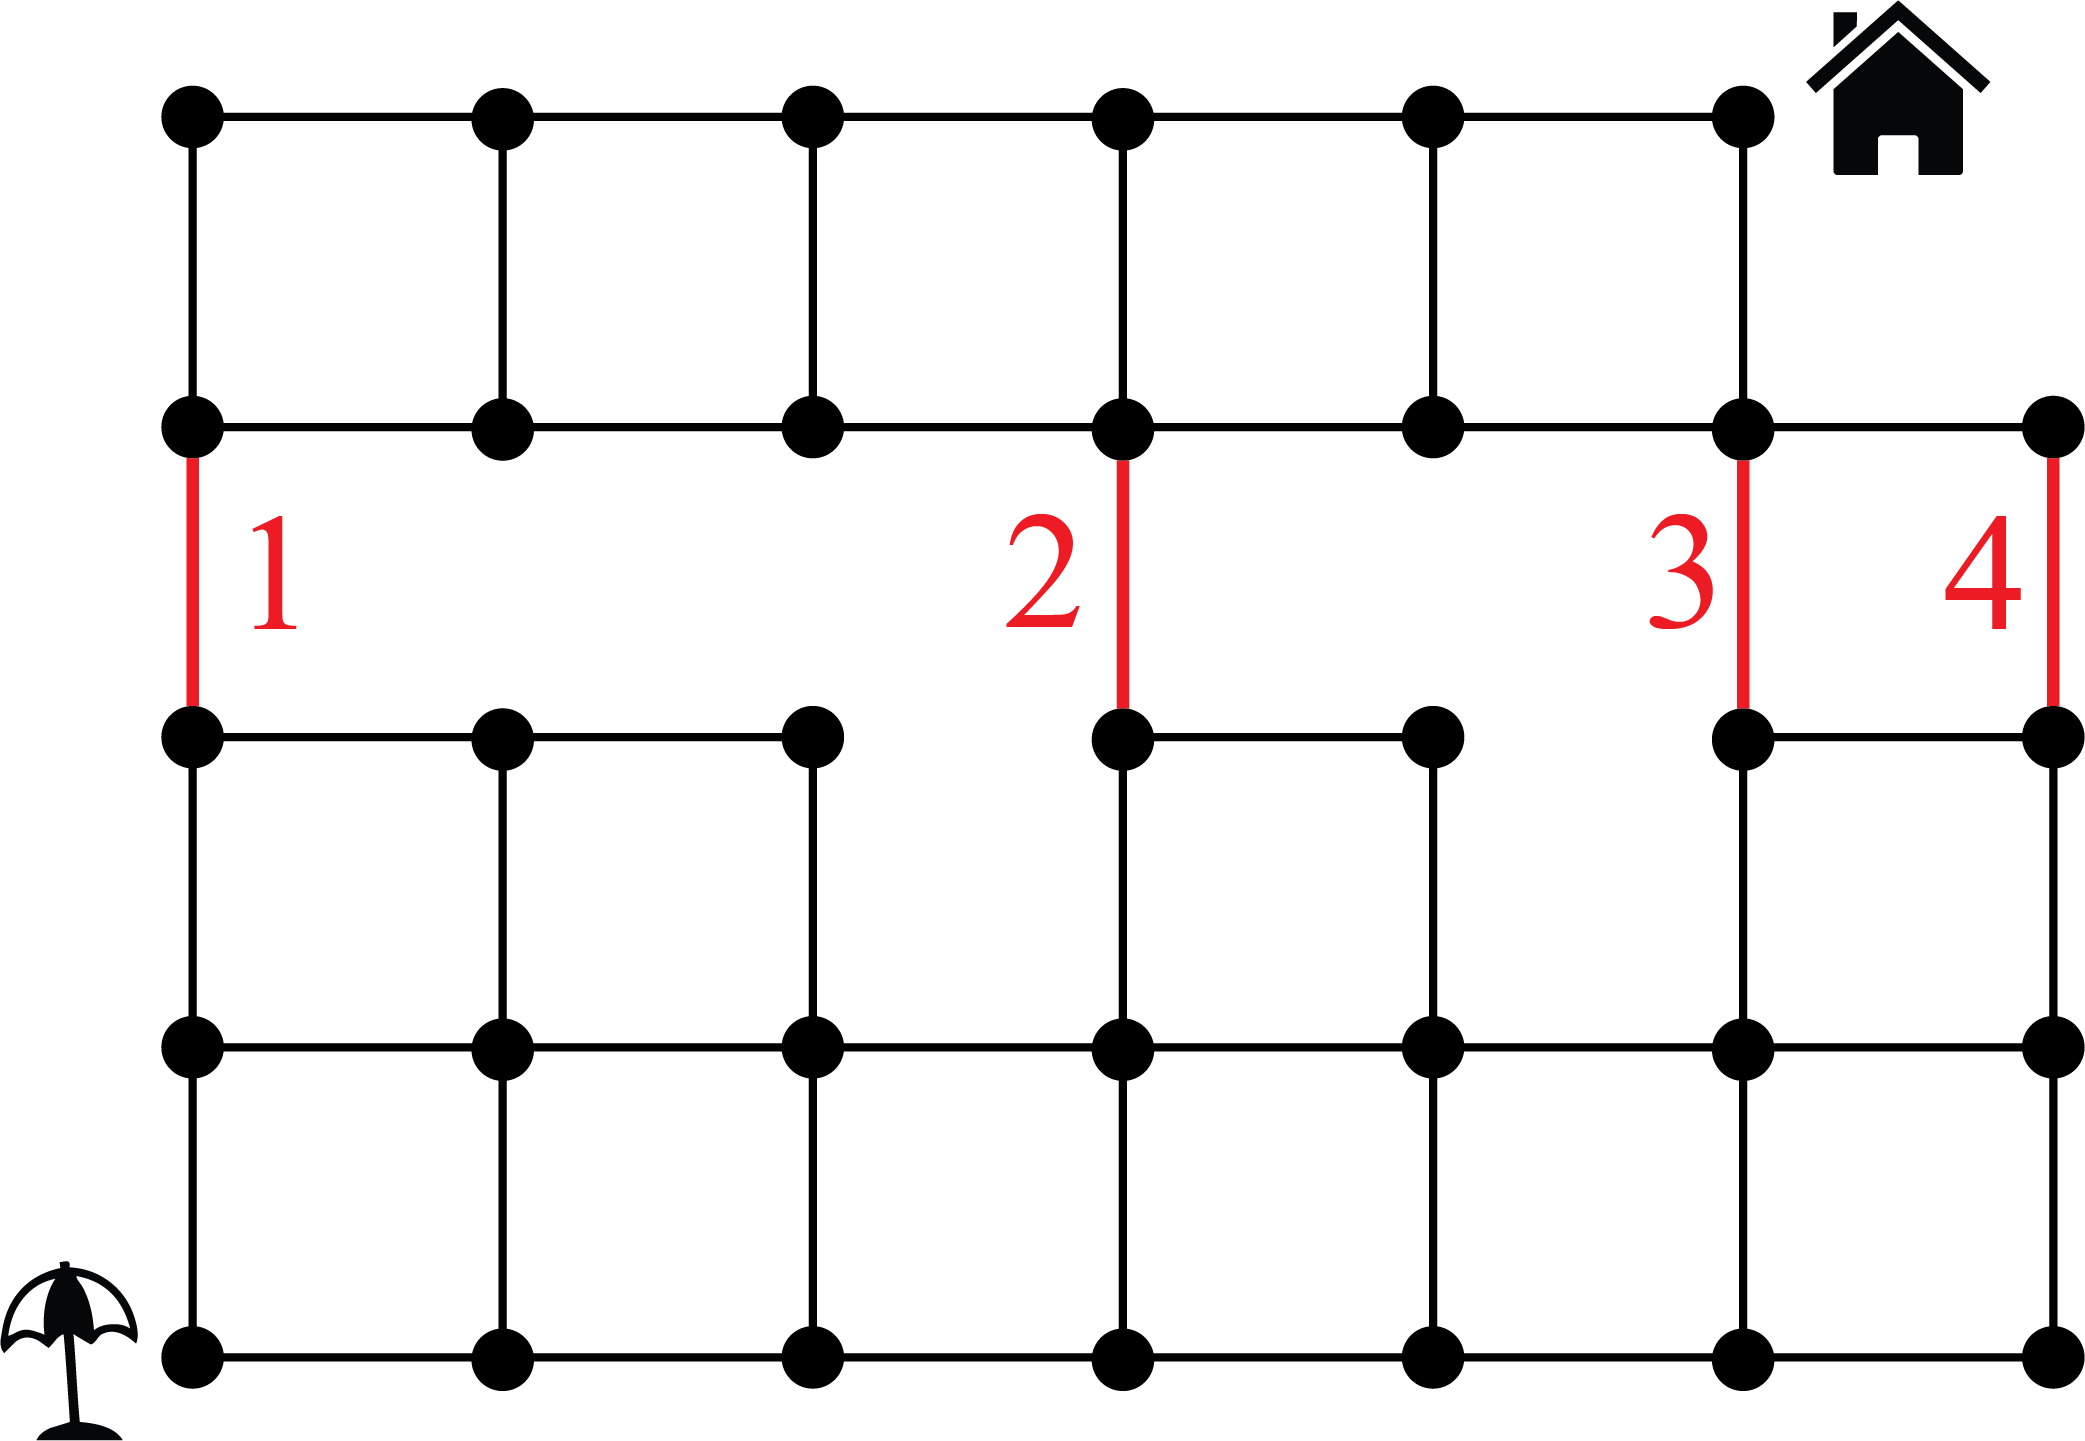 Four line segments in the grid are highlighted and are labelled 1, 2, 3, and 4.